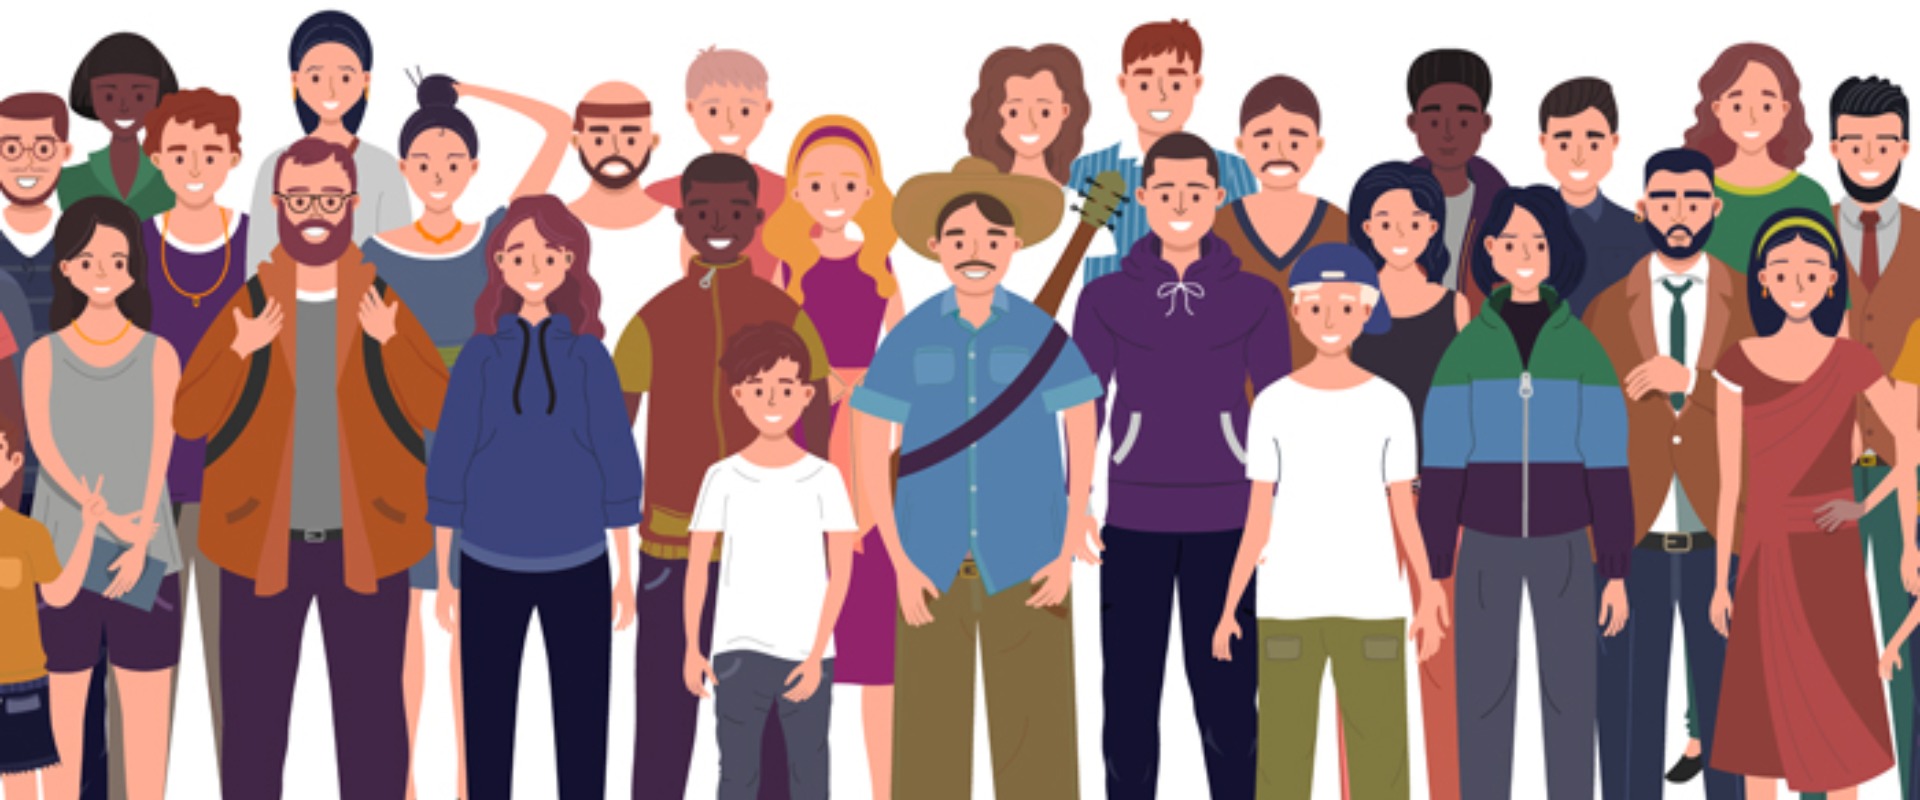 Graphic of multiple illustrated people